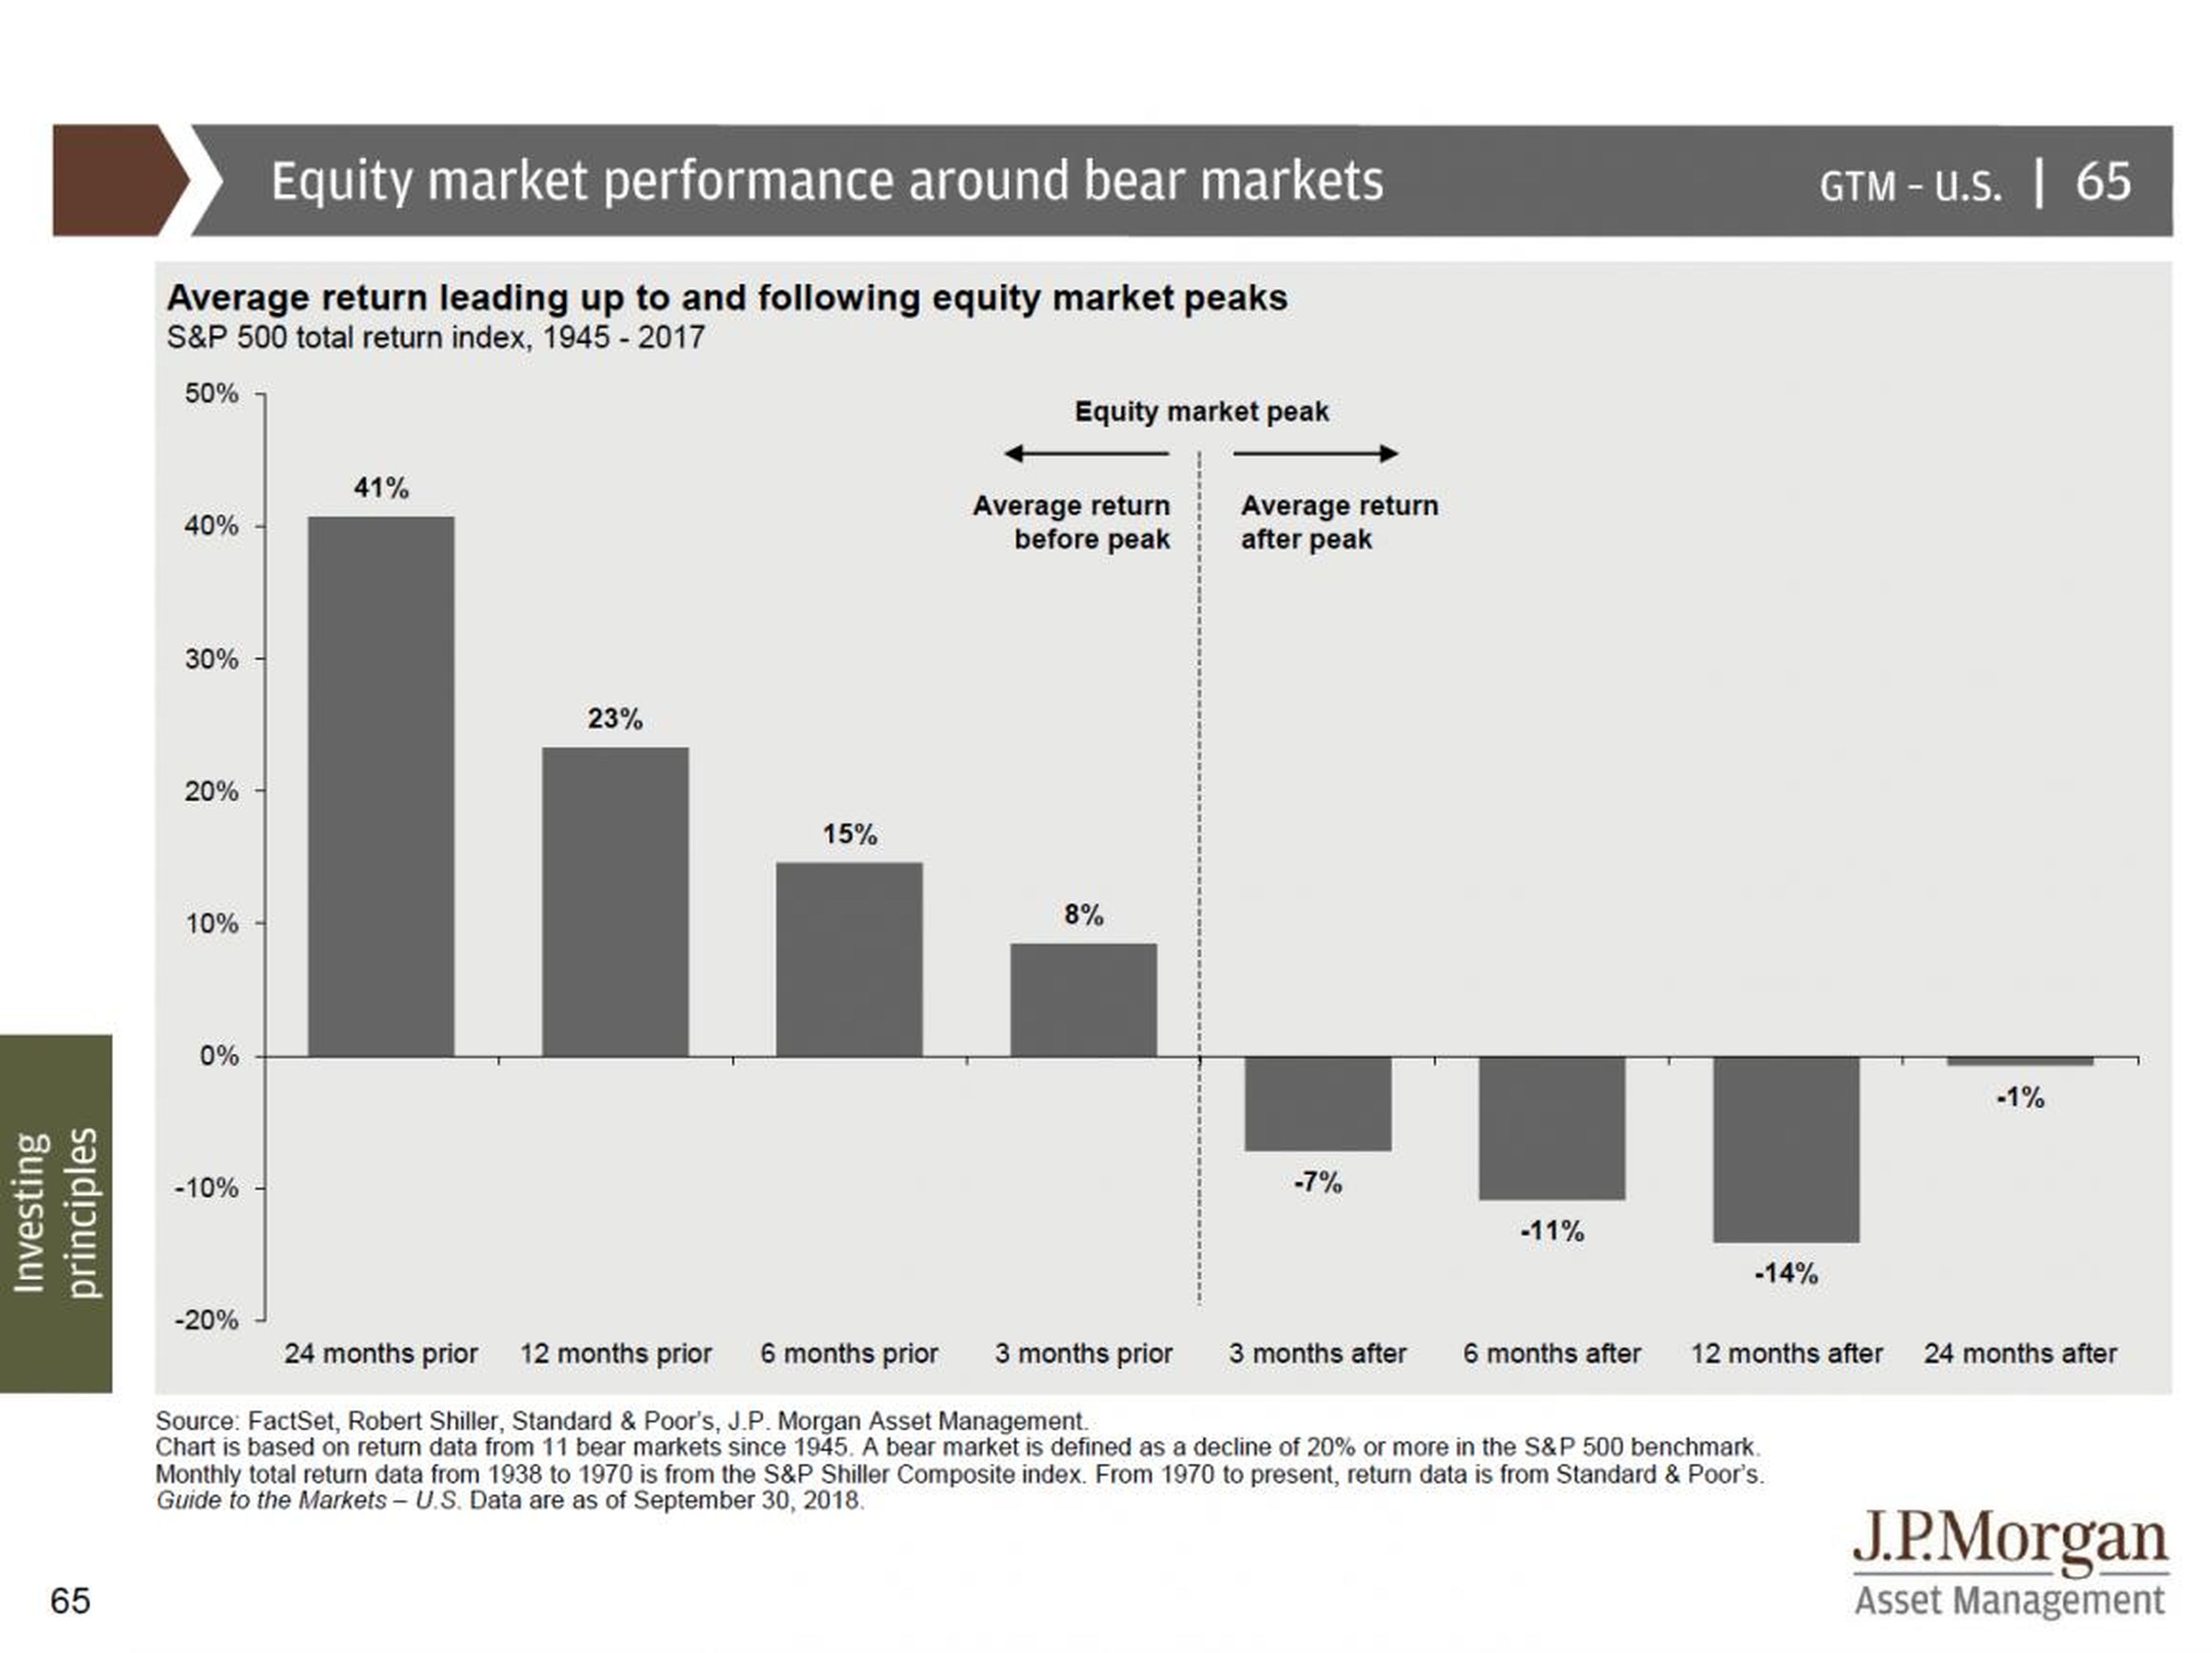 JPMorgan's ultimate guide to markets and the economy